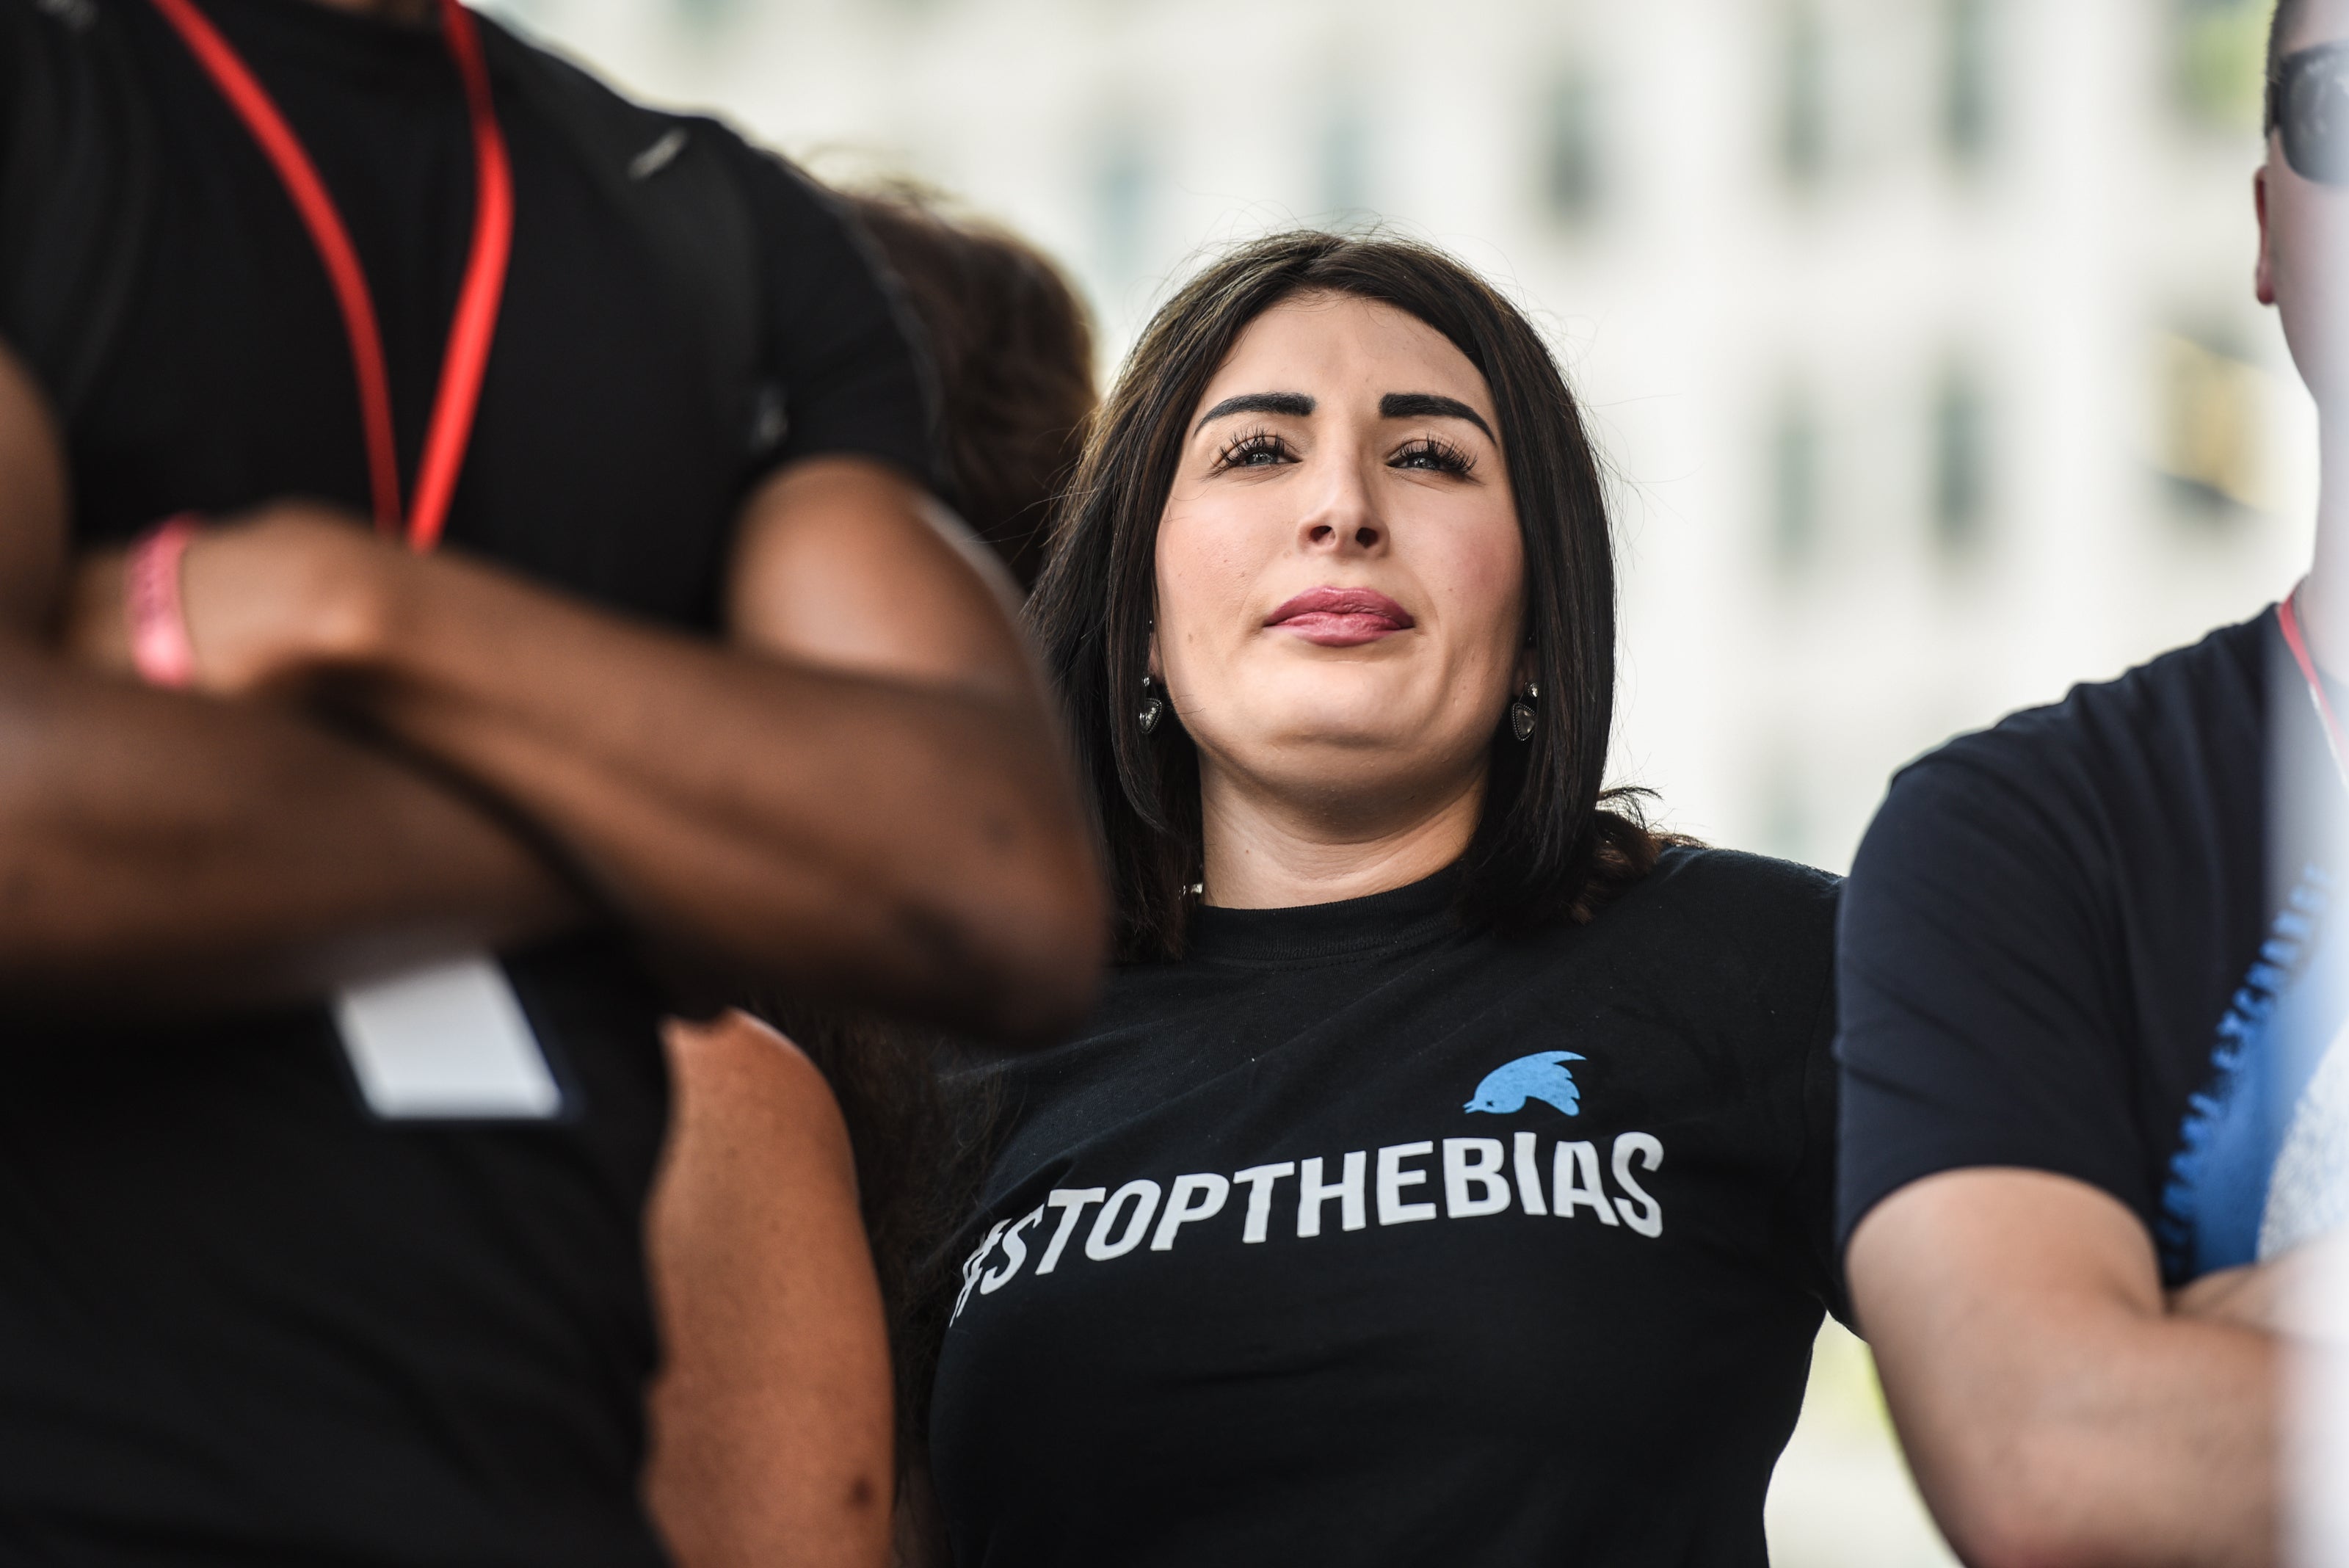 Laura Loomer waits backstage during a "Demand Free Speech" rally on Freedom Plaza on July 6, 2019 in Washington, DC.